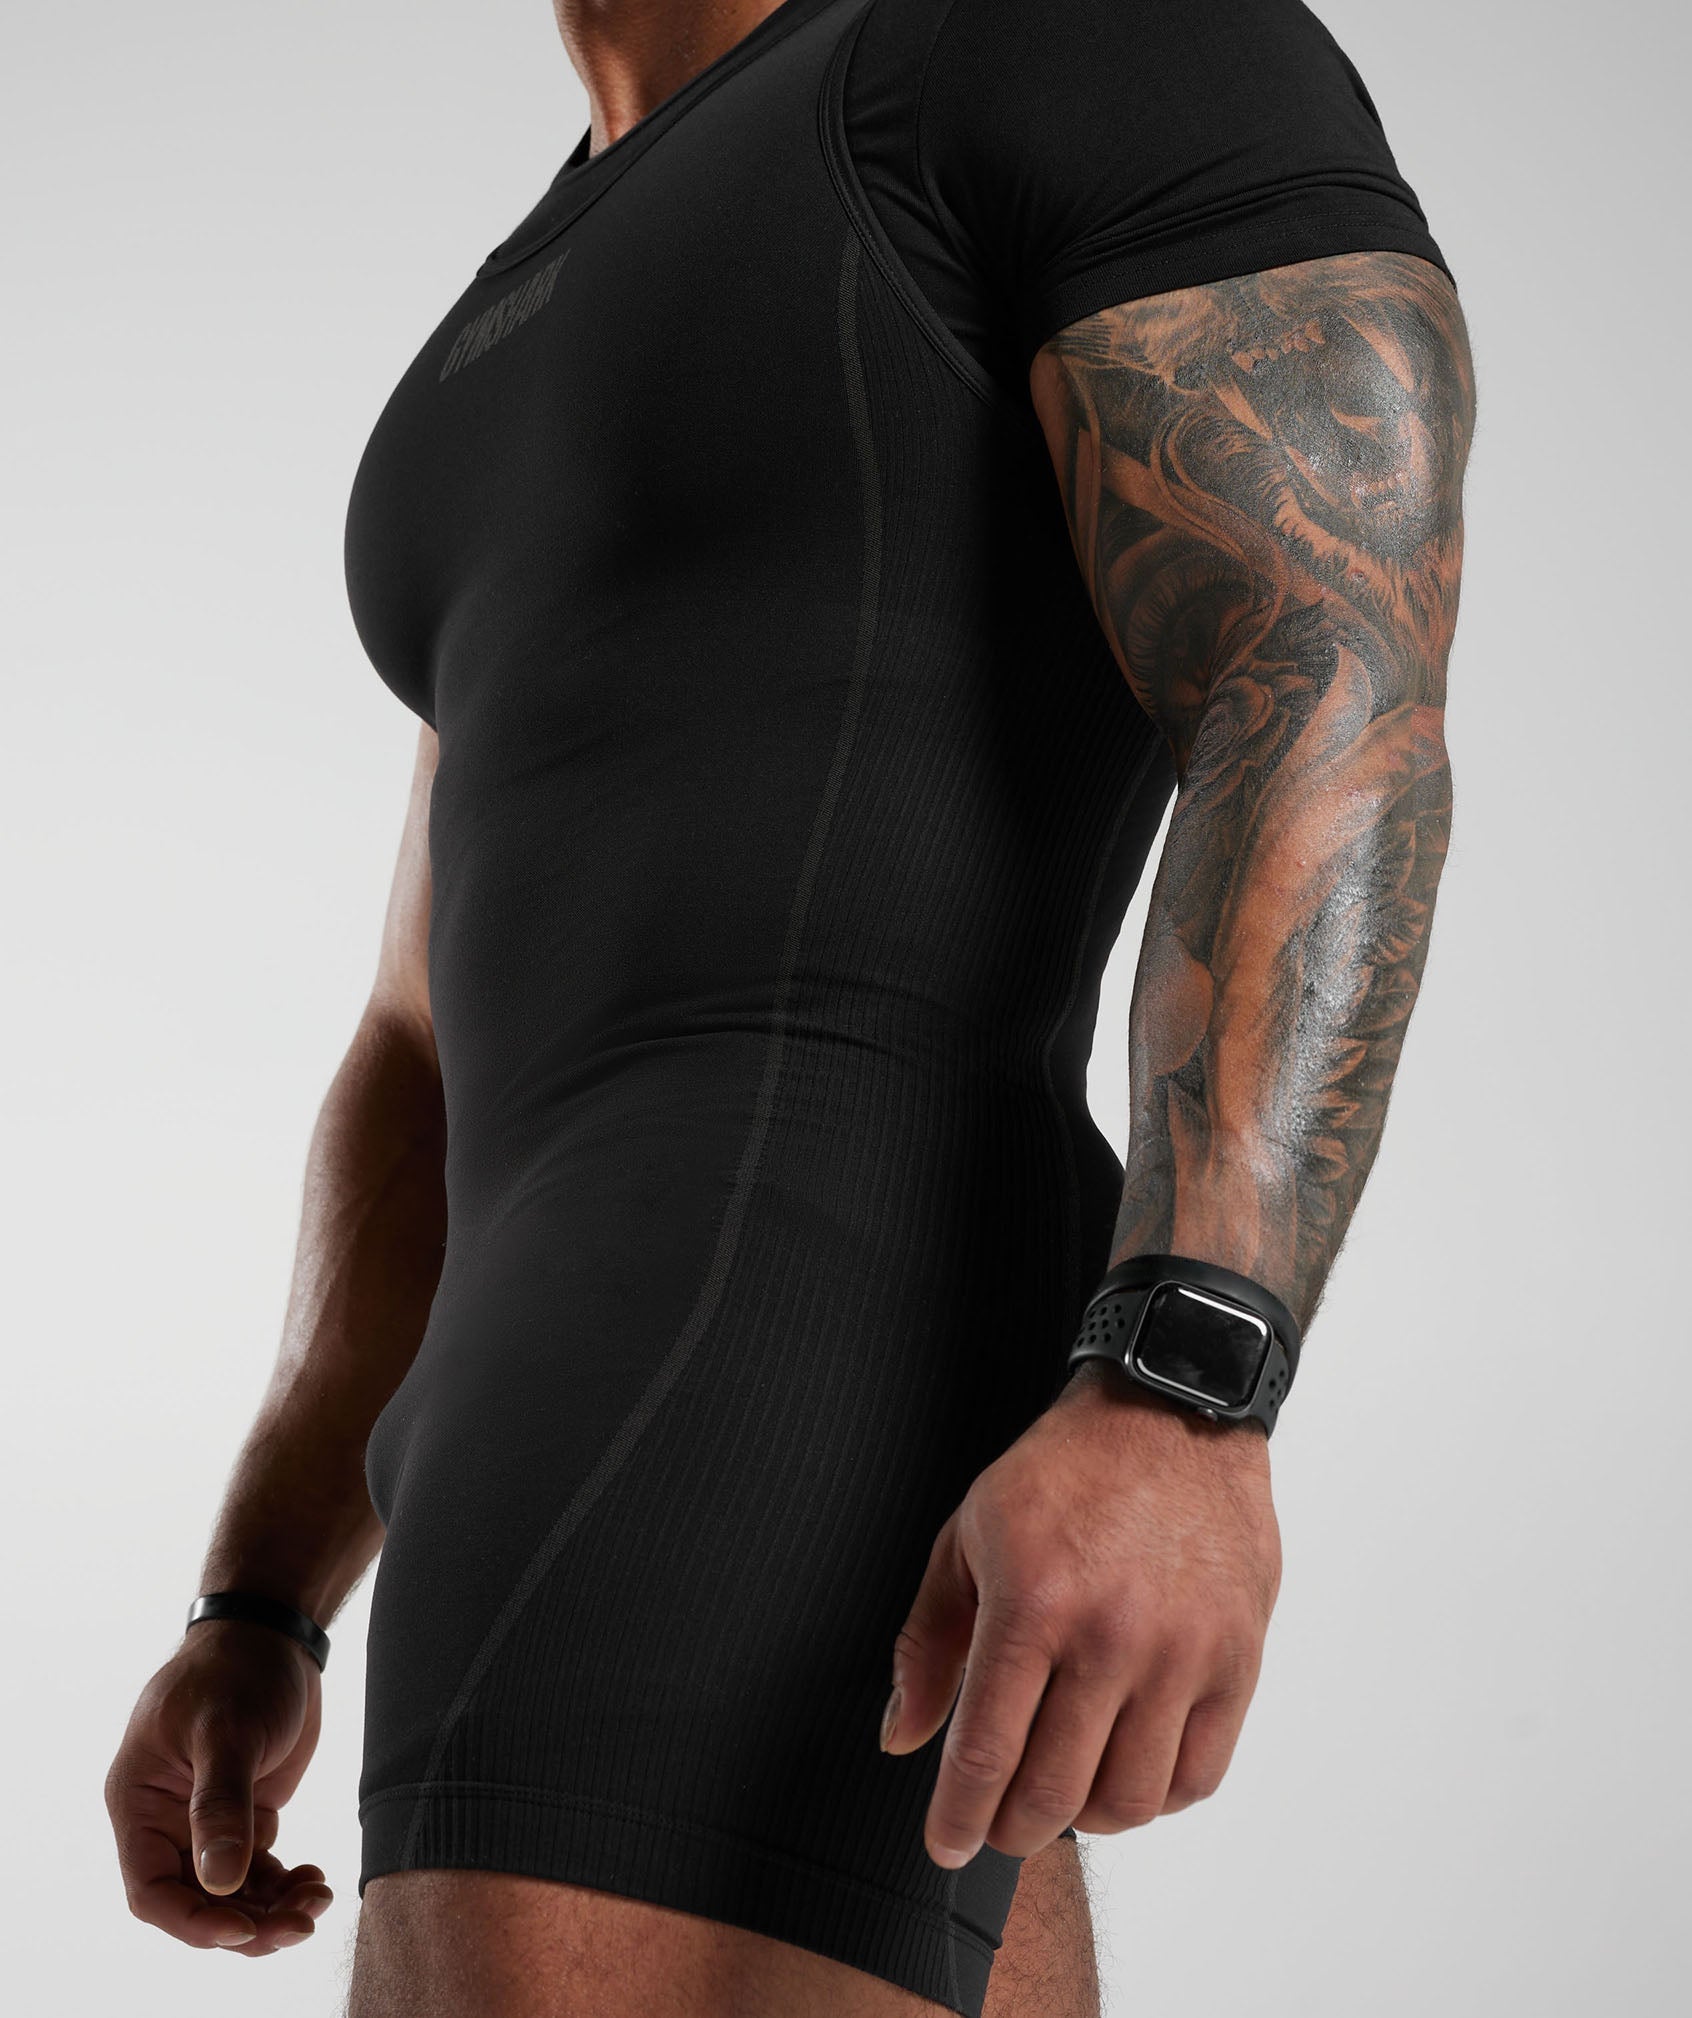 Seamless Singlet in Black/Charcoal Grey - view 3